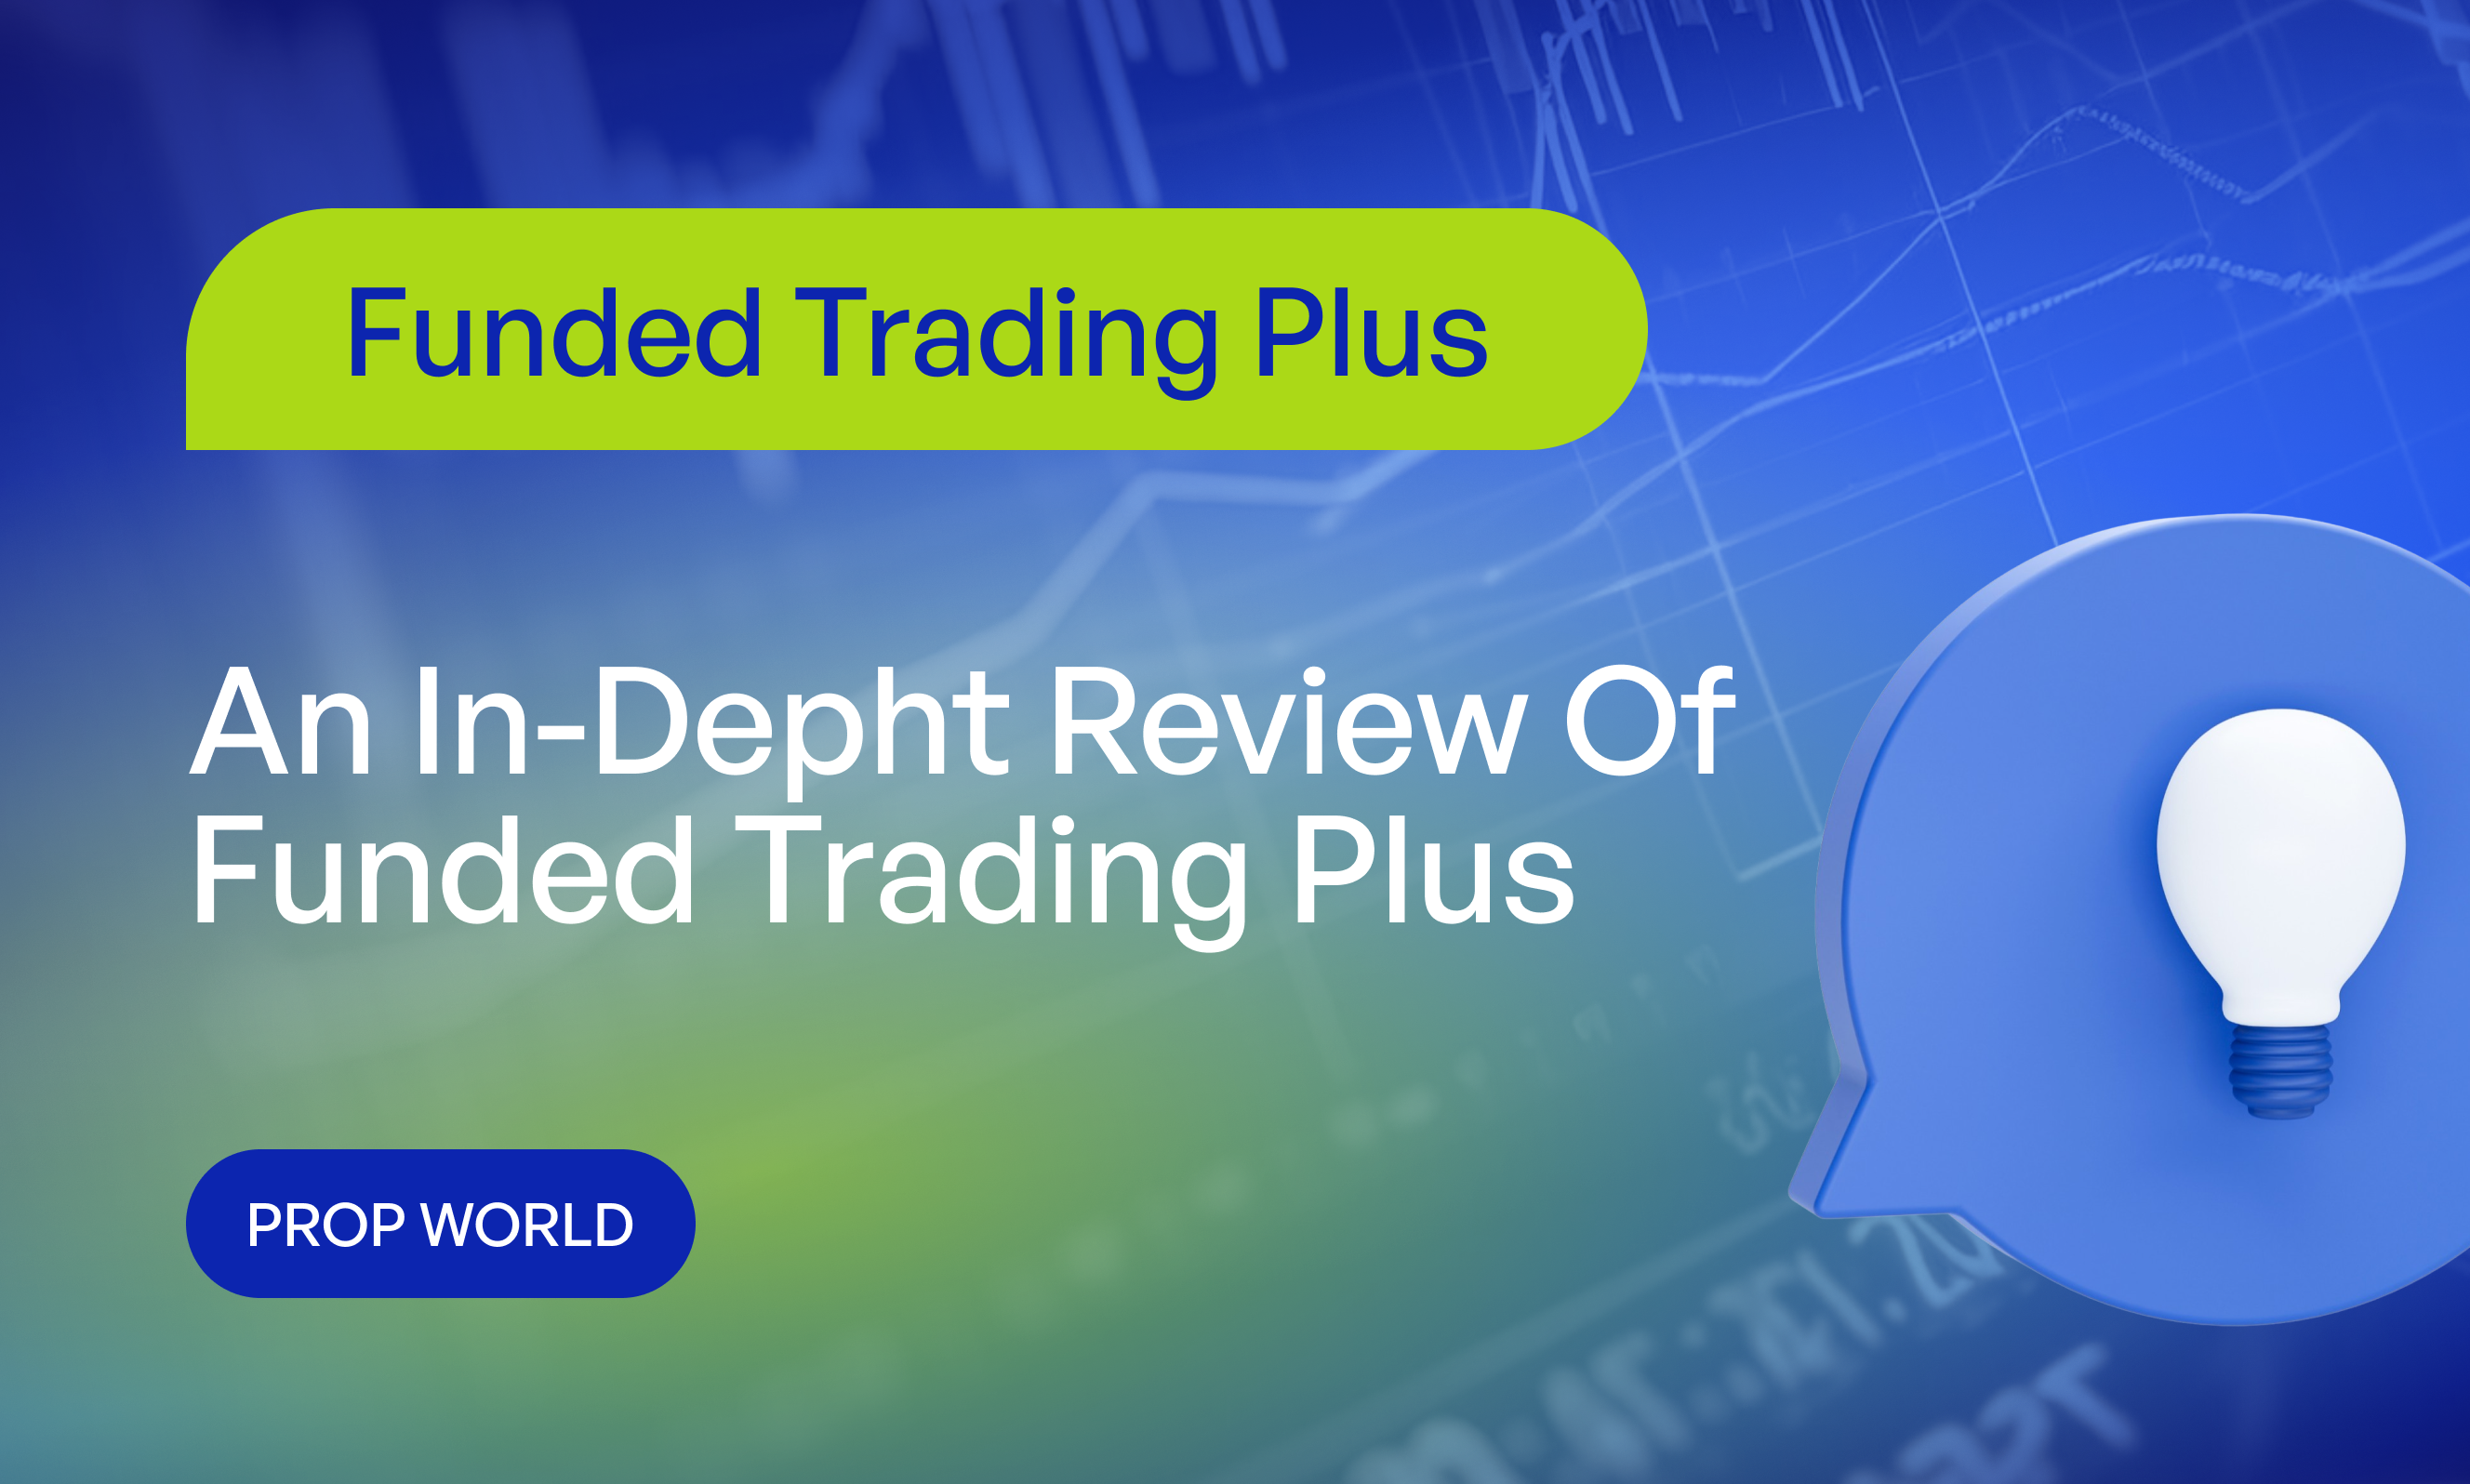 An In-Depht Review Of Funded Trading Plus